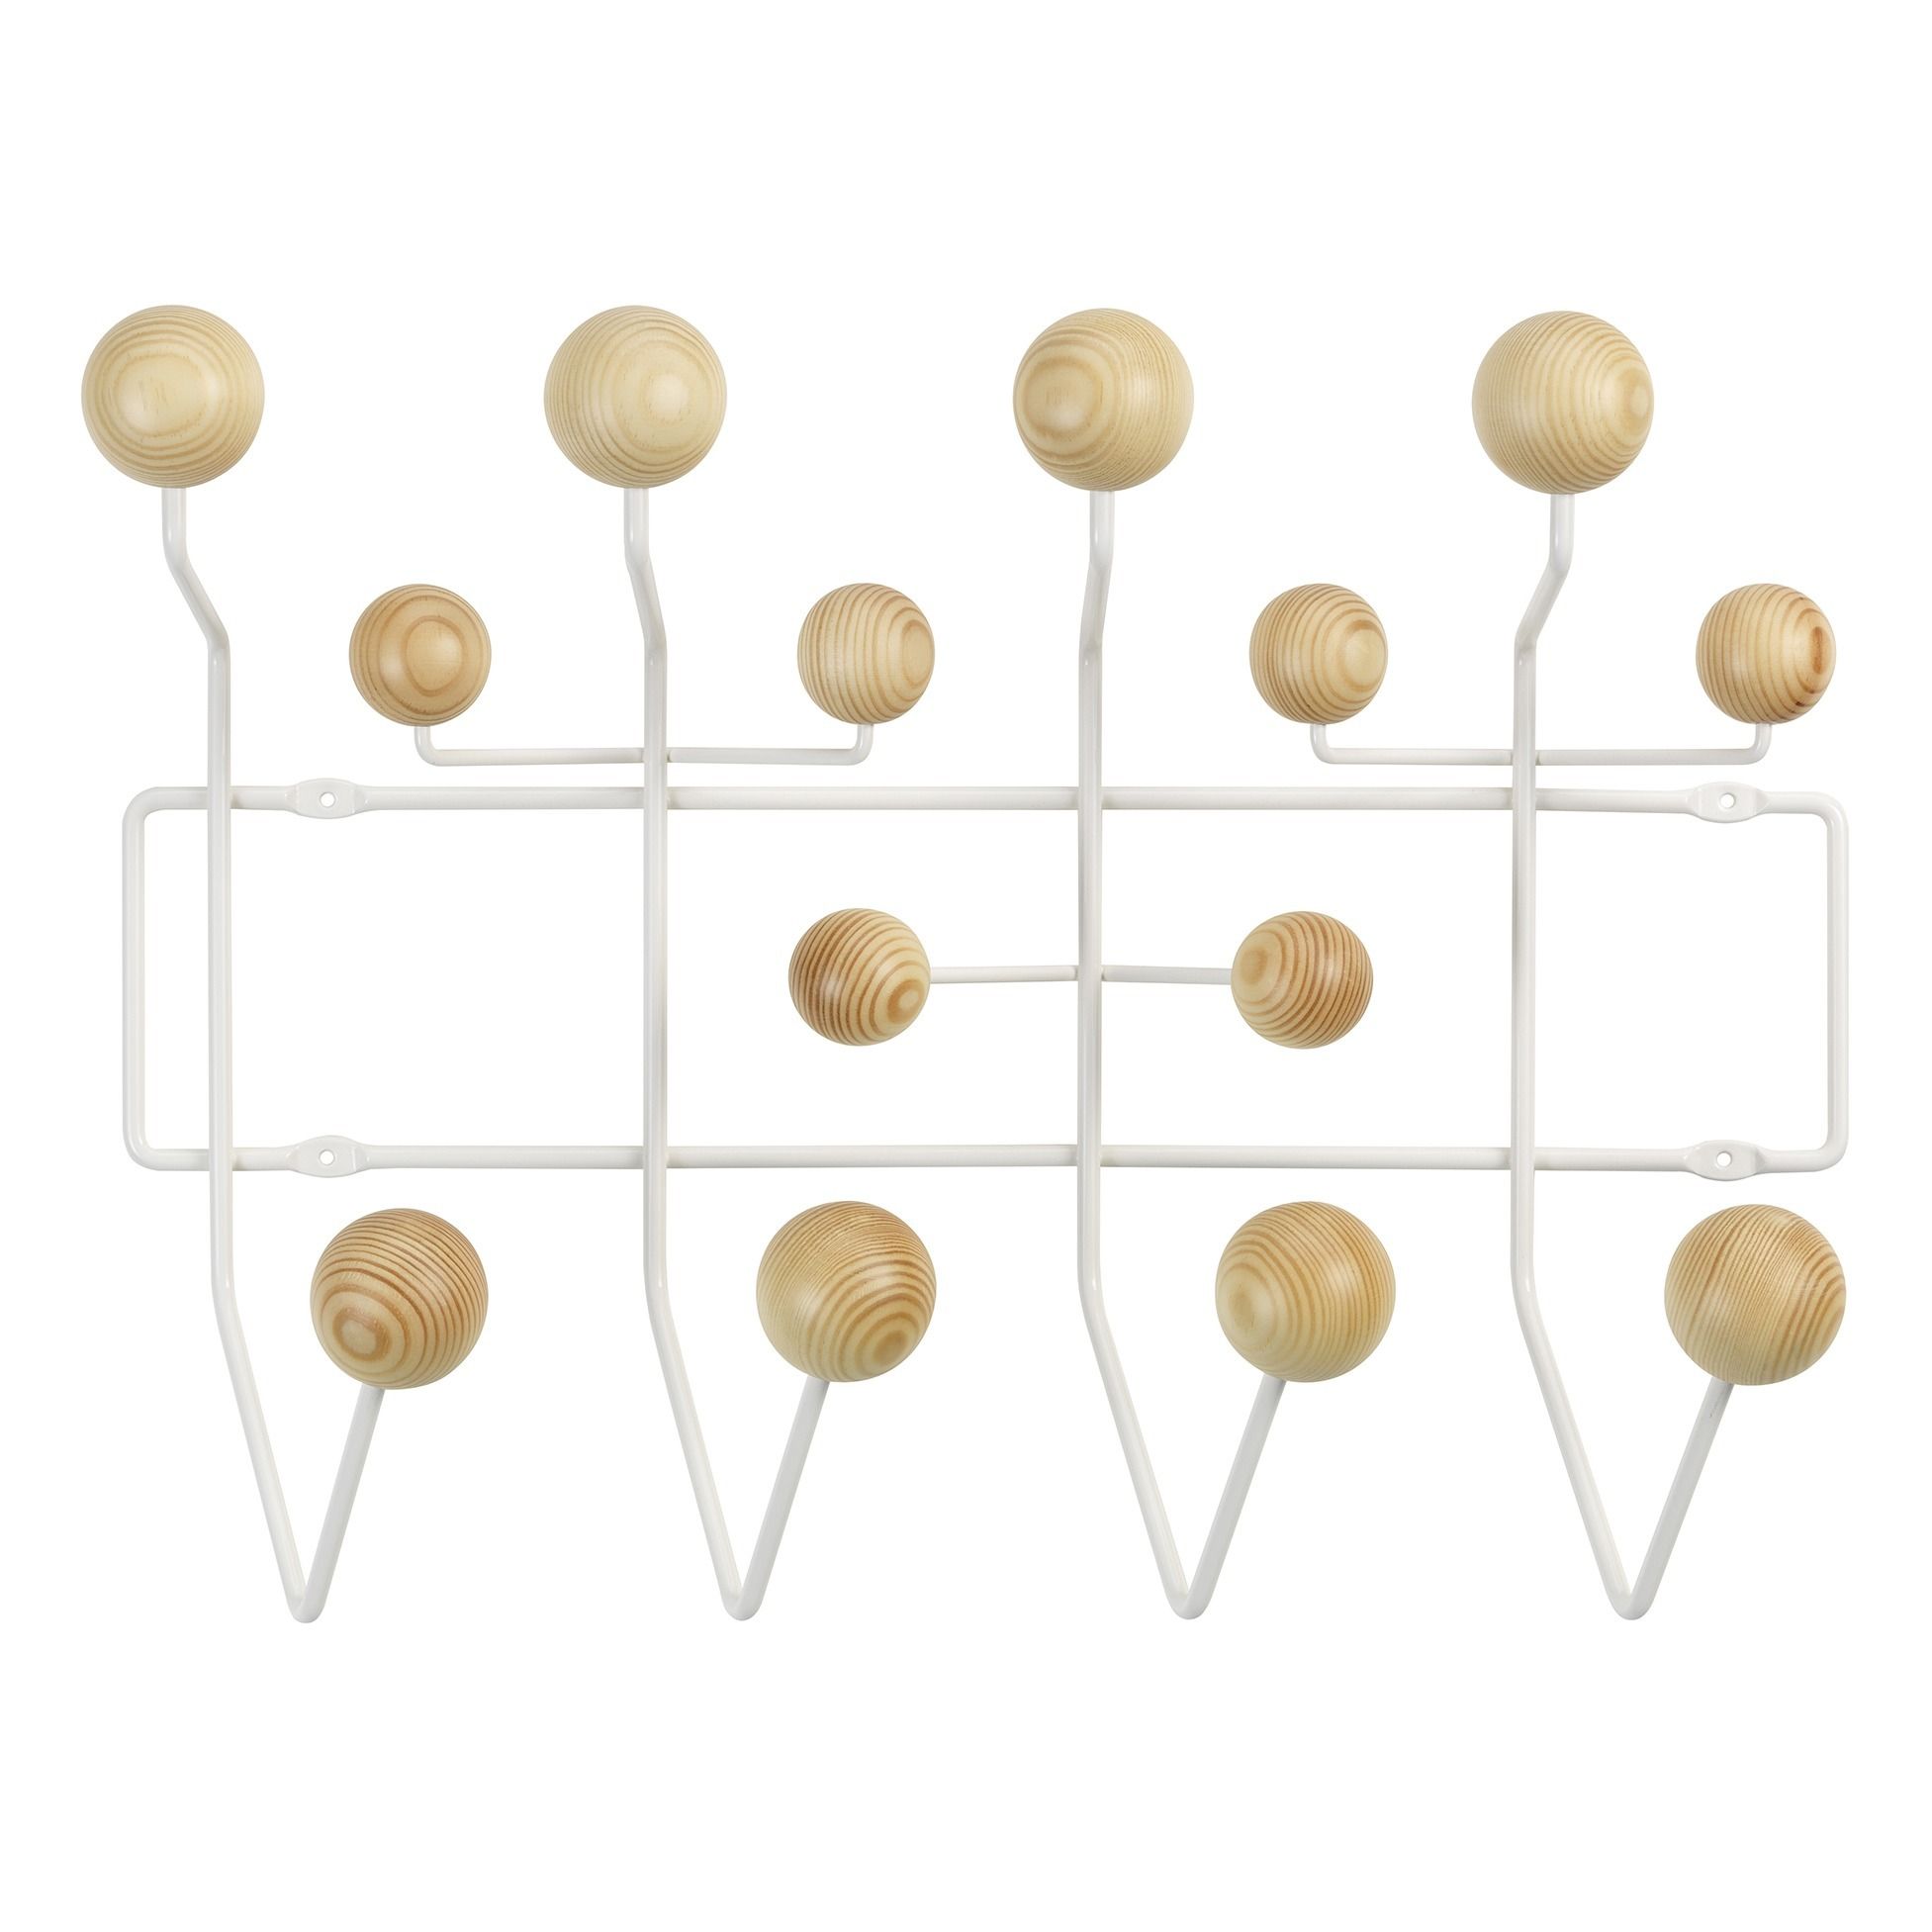 Vitra - Porte-manteaux Hang it all - Charles & Ray Eames - Pin